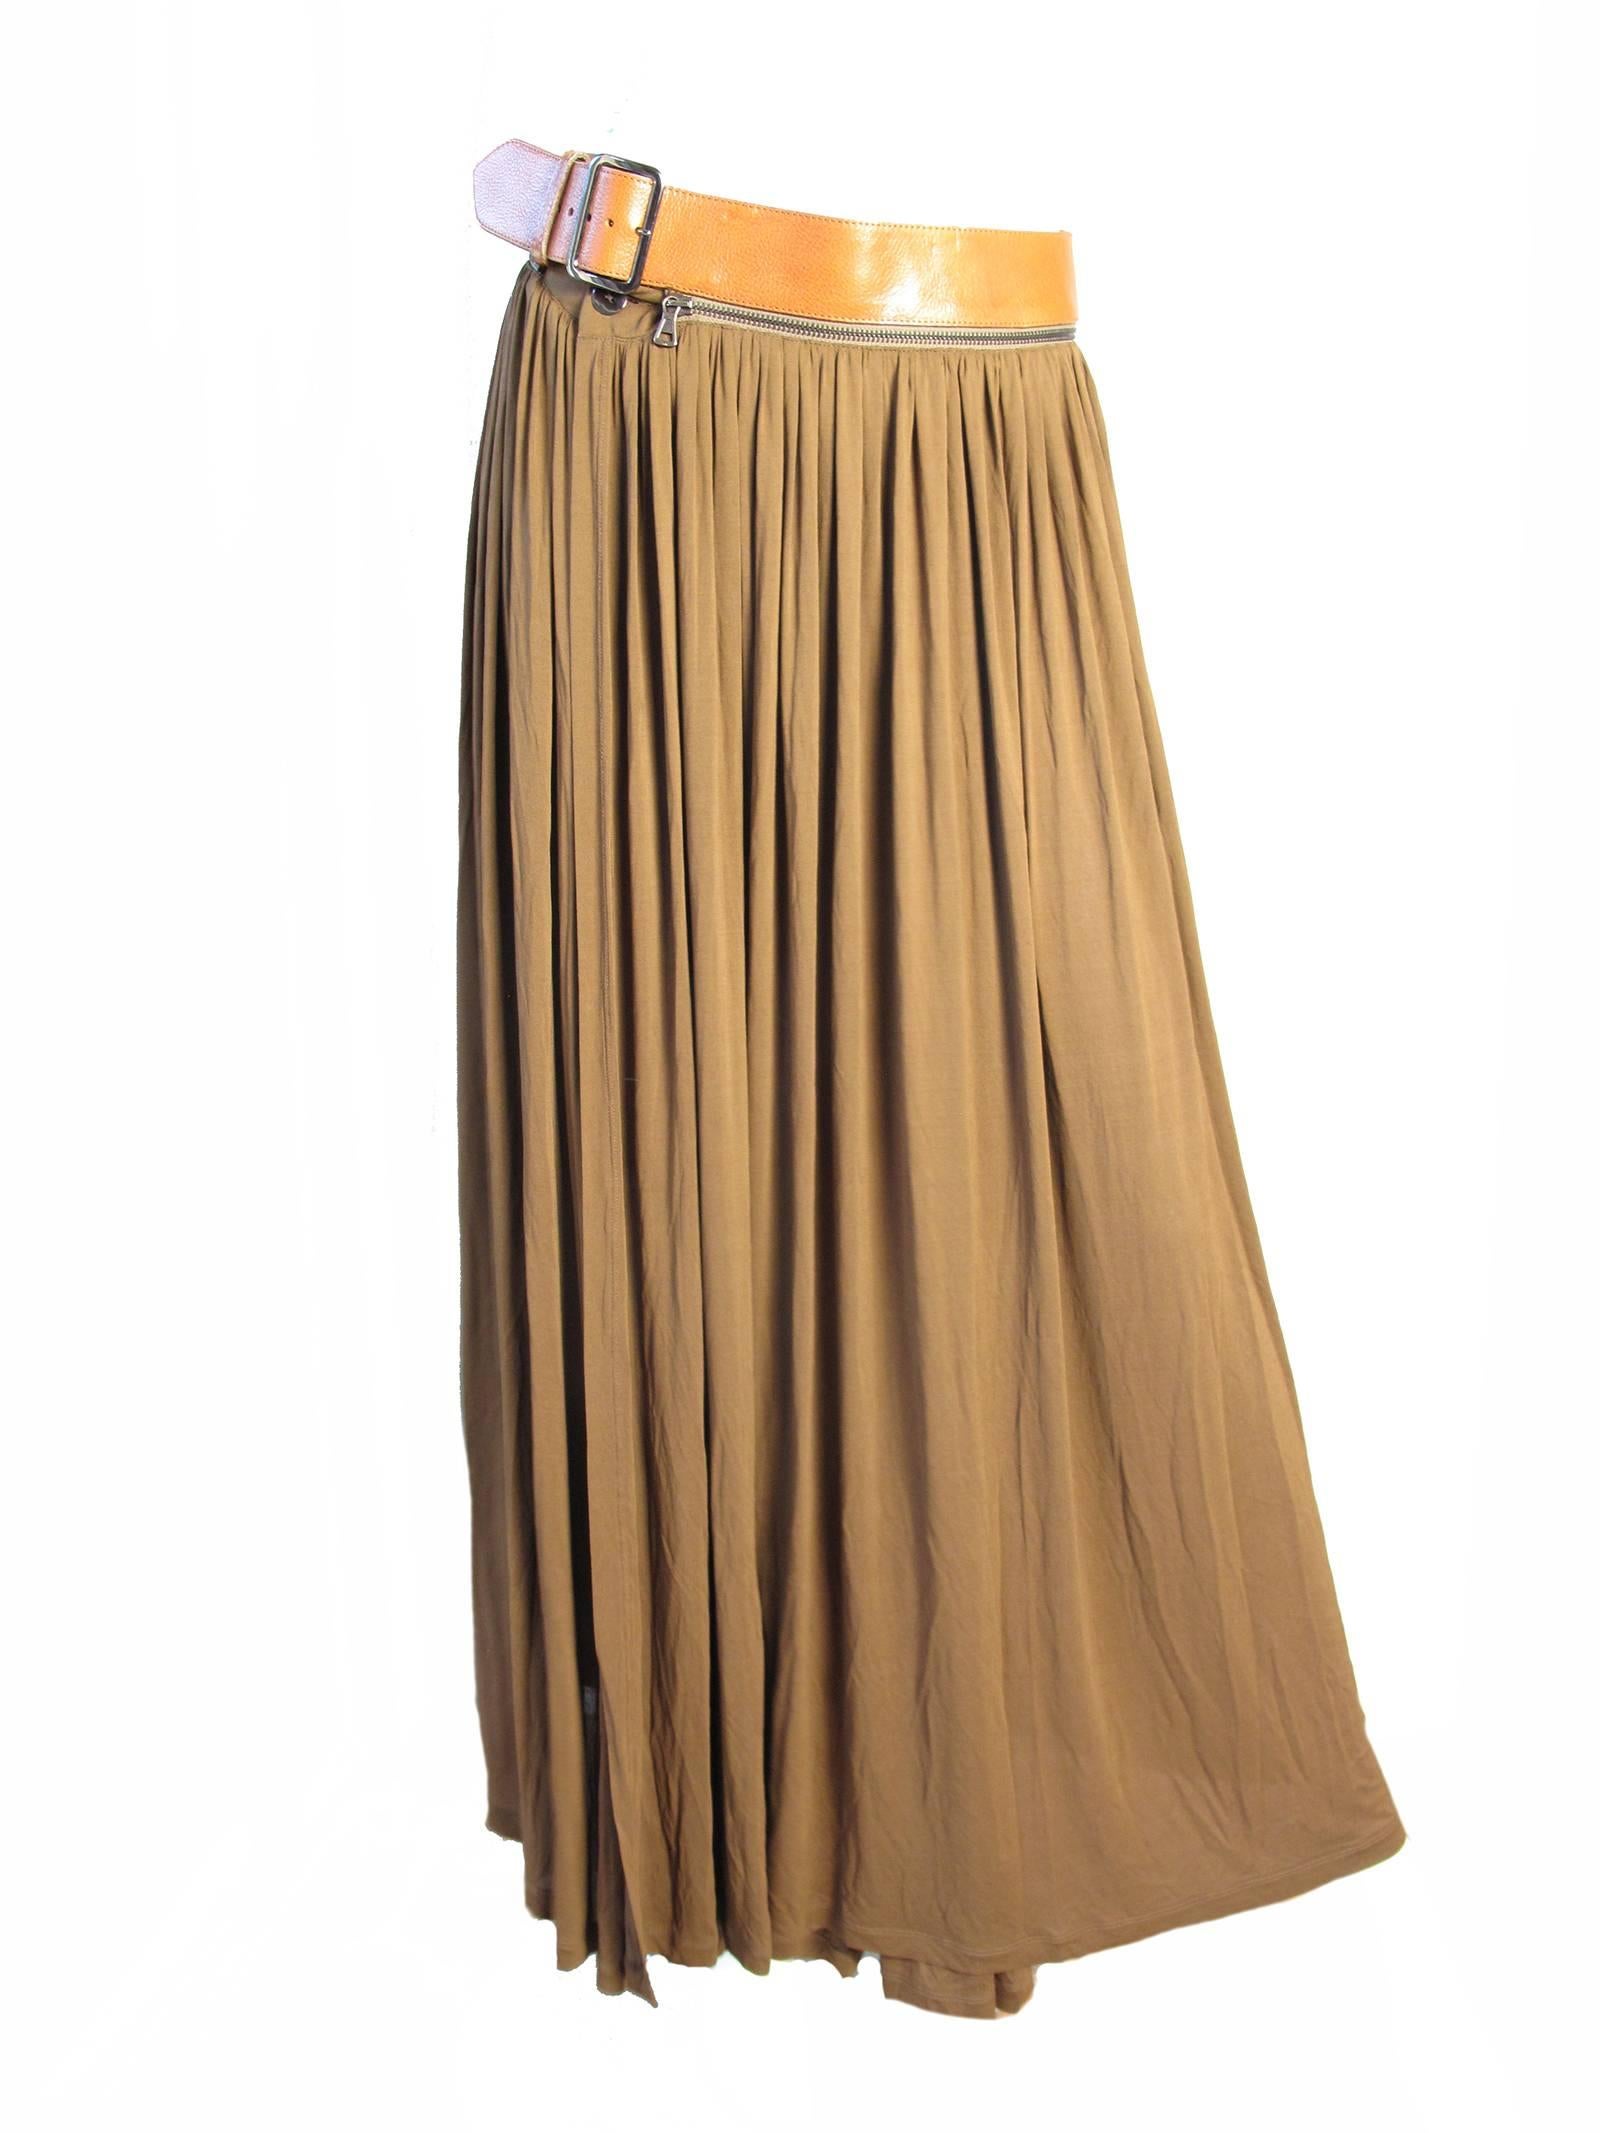 Women's 1990s Gaultier Silk Skirt with Leather Removable Belt